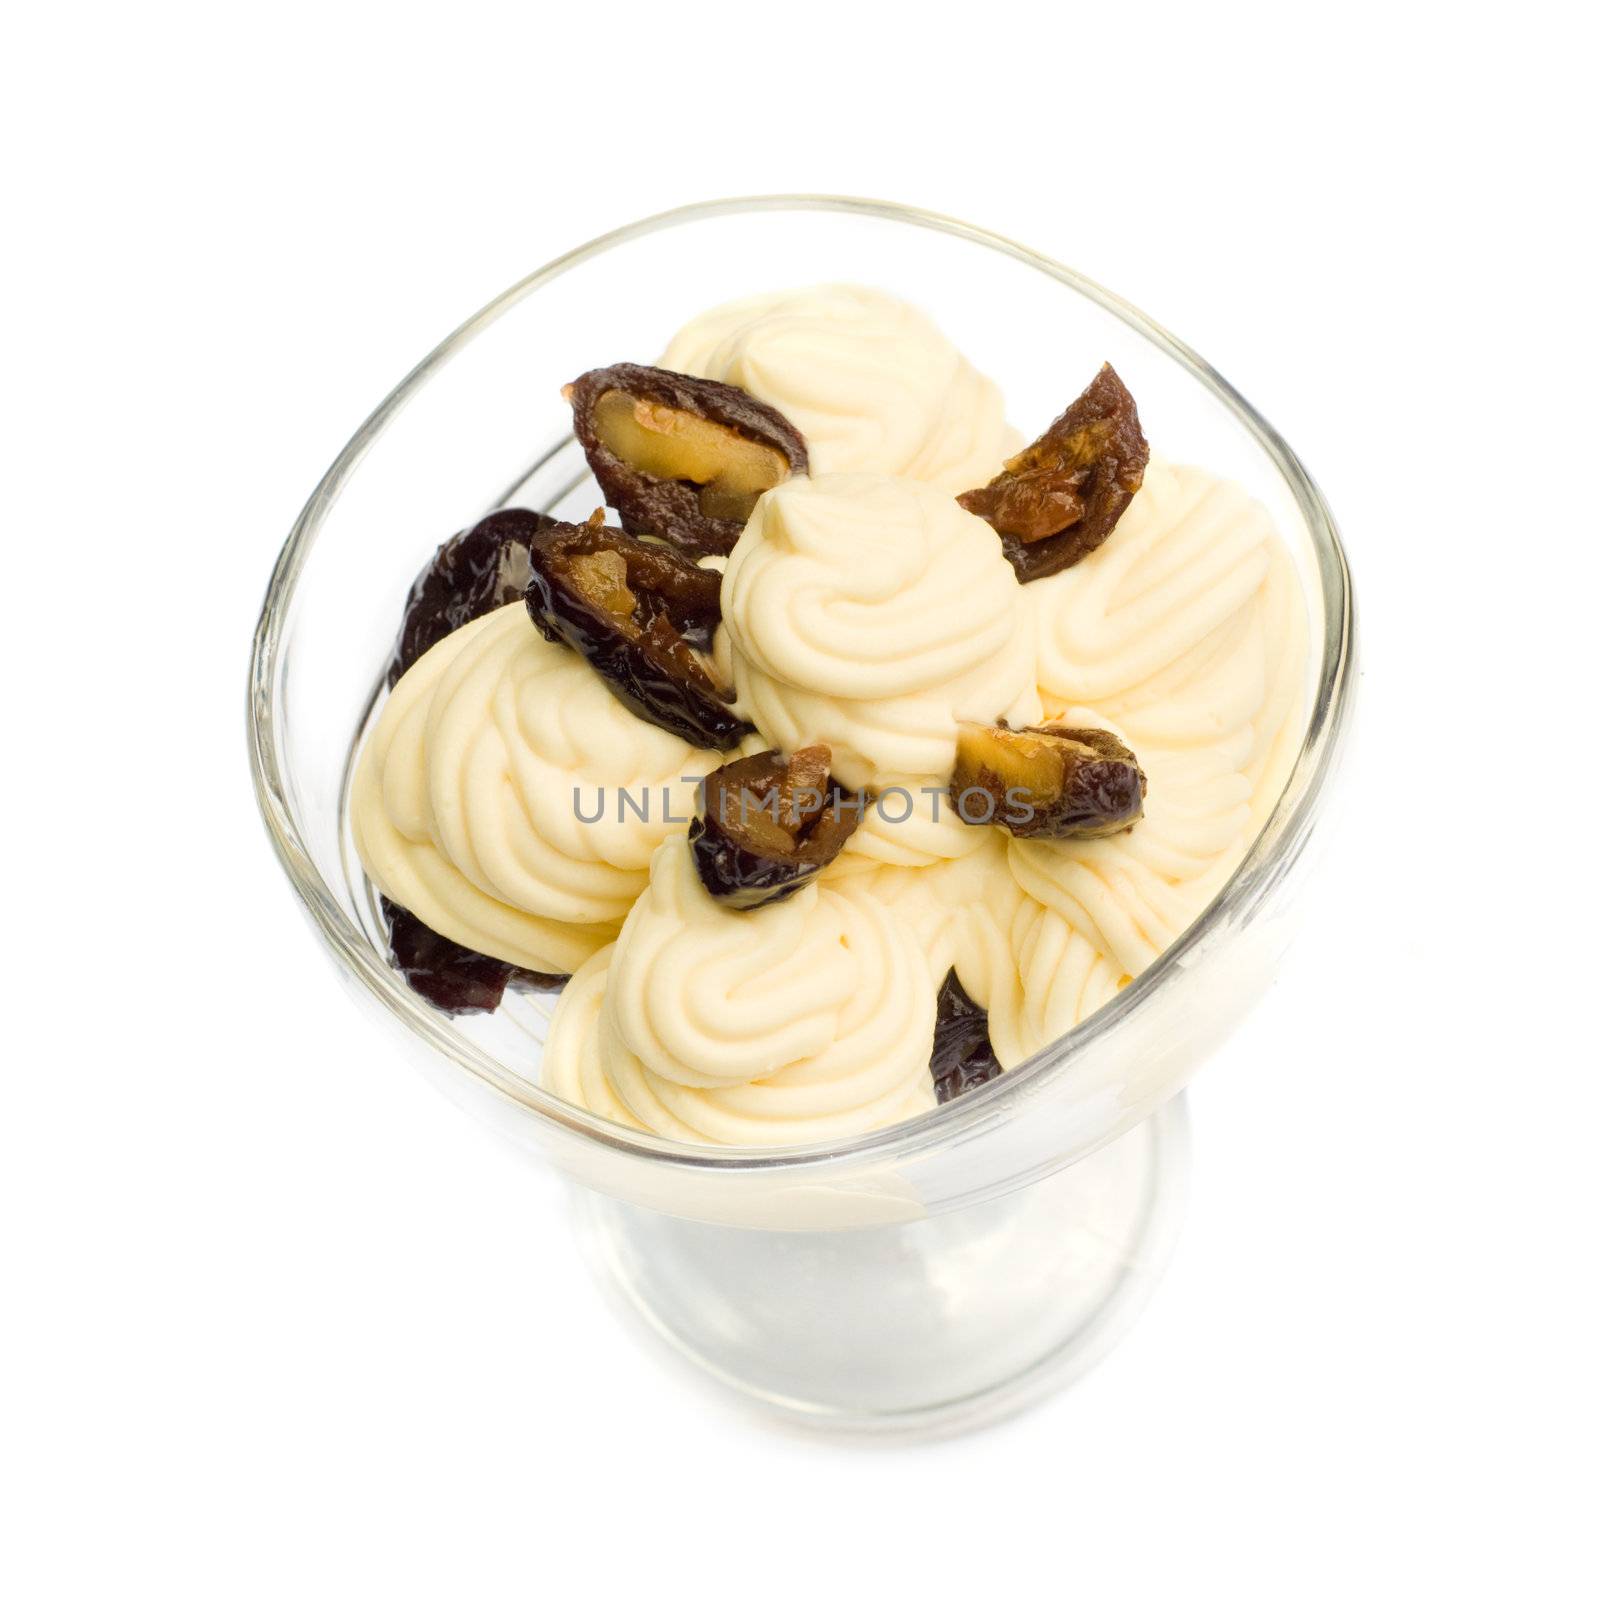 prunes stuffed with nuts, in weet cream by starush